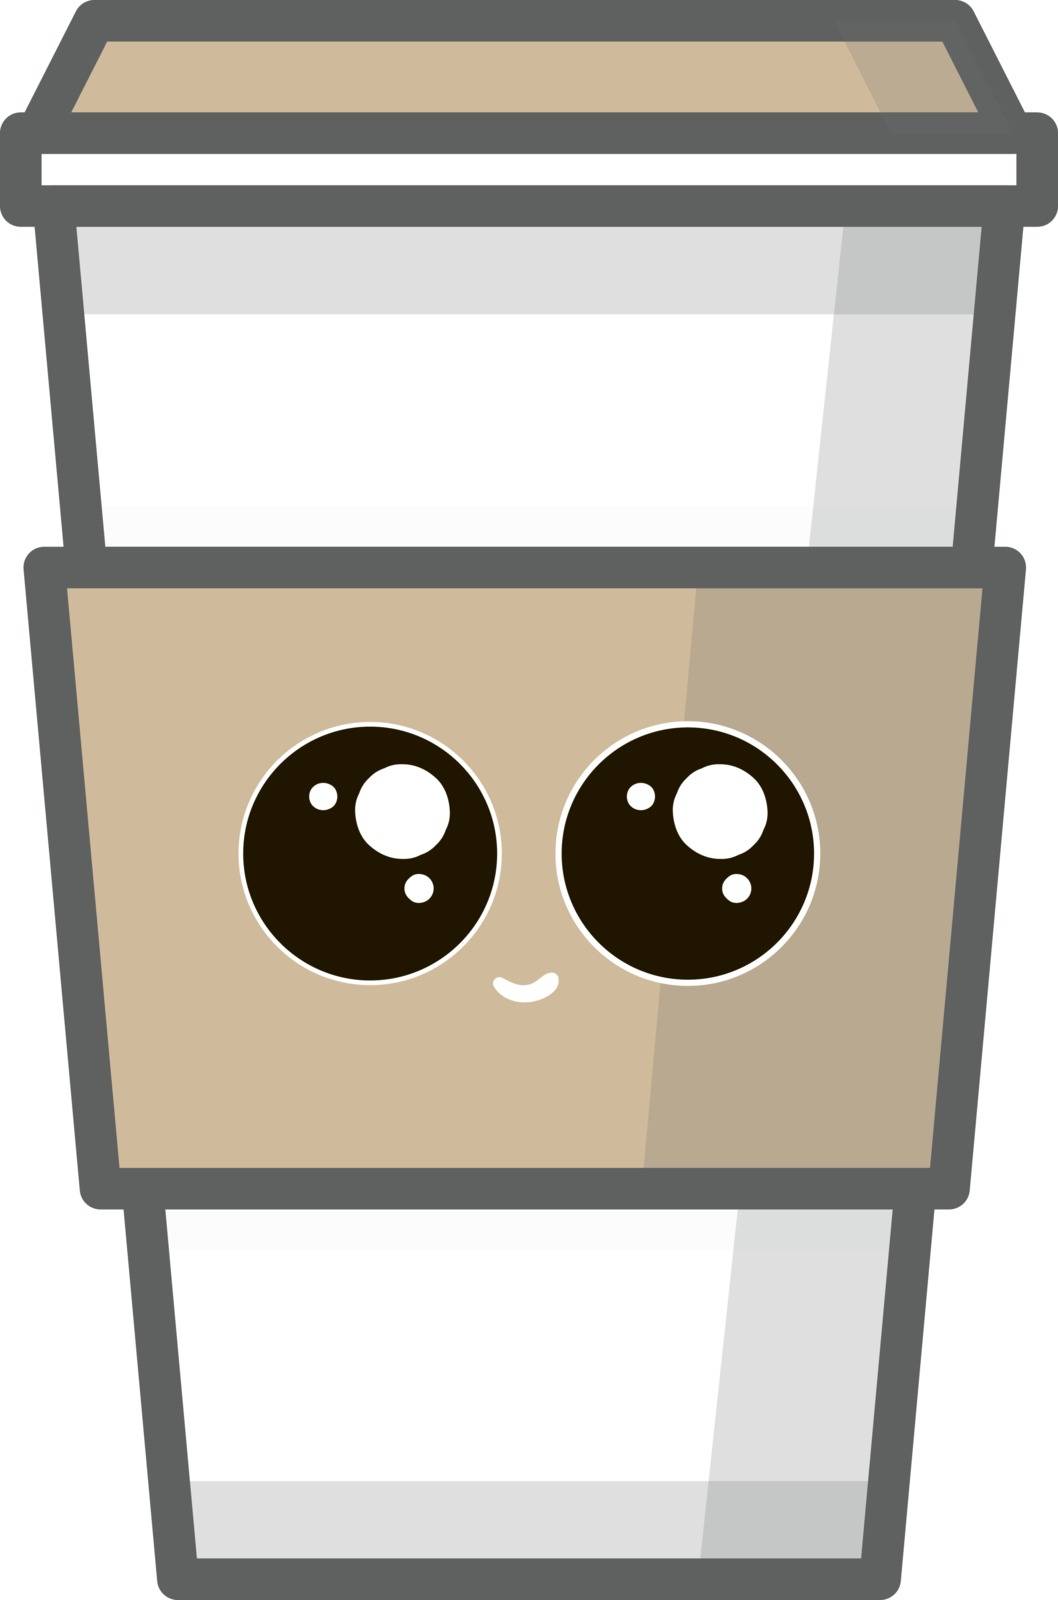 Coffee to go with cute eyes, illustration, vector on white background.